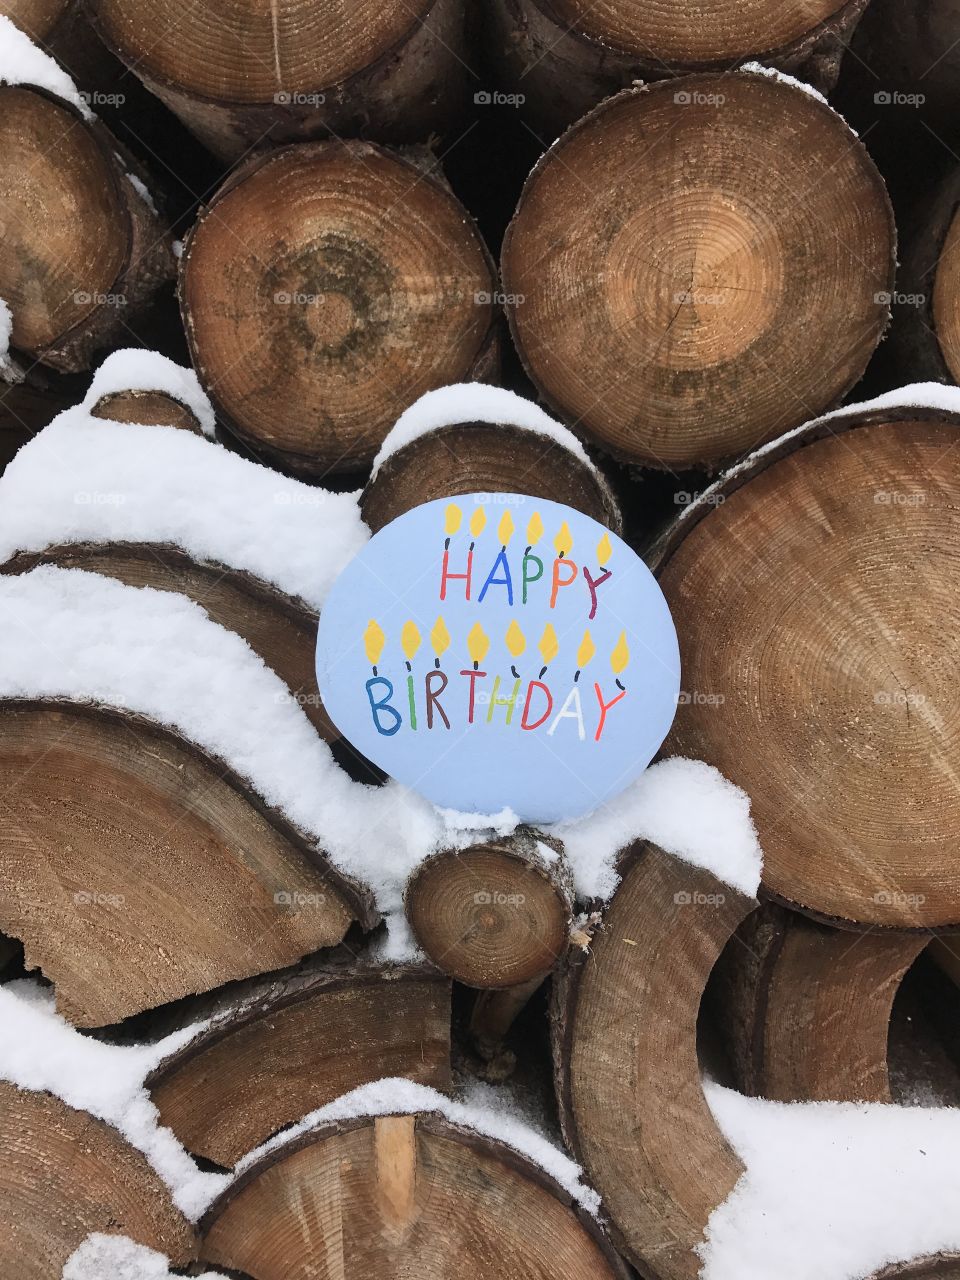 Happy Birthday stone with cutted trunks background and snow